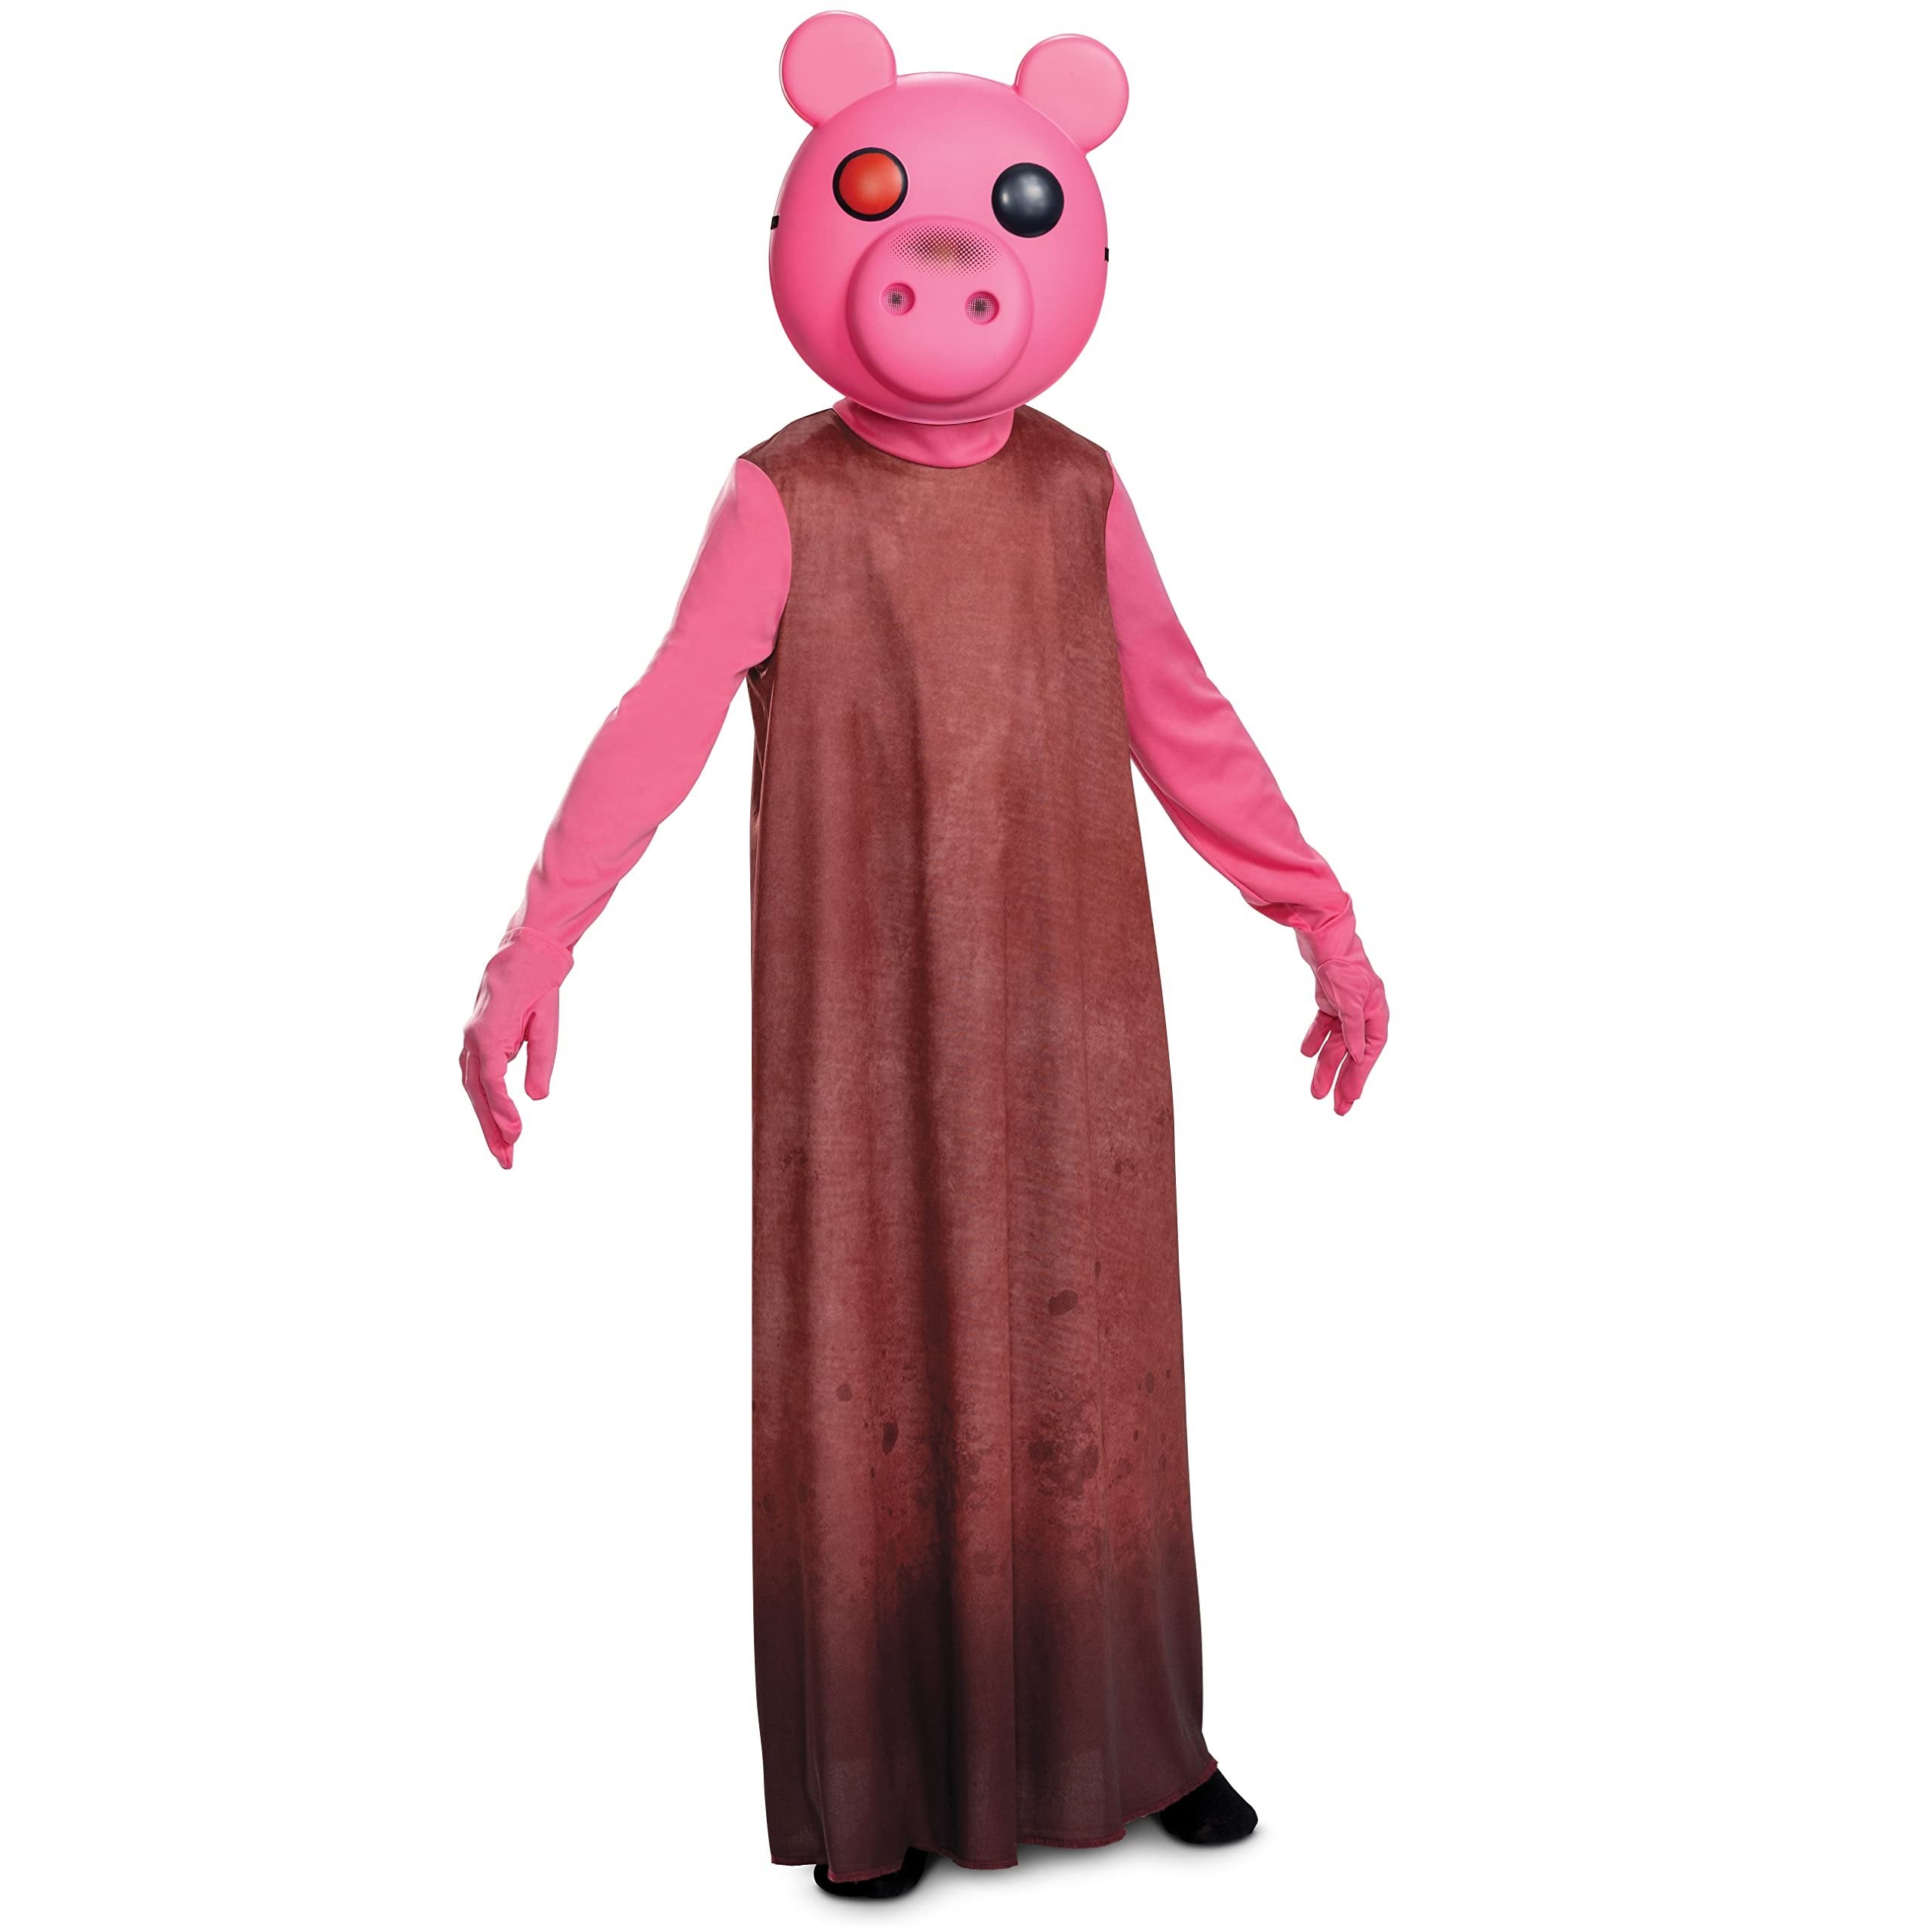 Piggy Costume for Kids, Official Piggy Video Game Costume Outfit and Mask, Size (10-12)